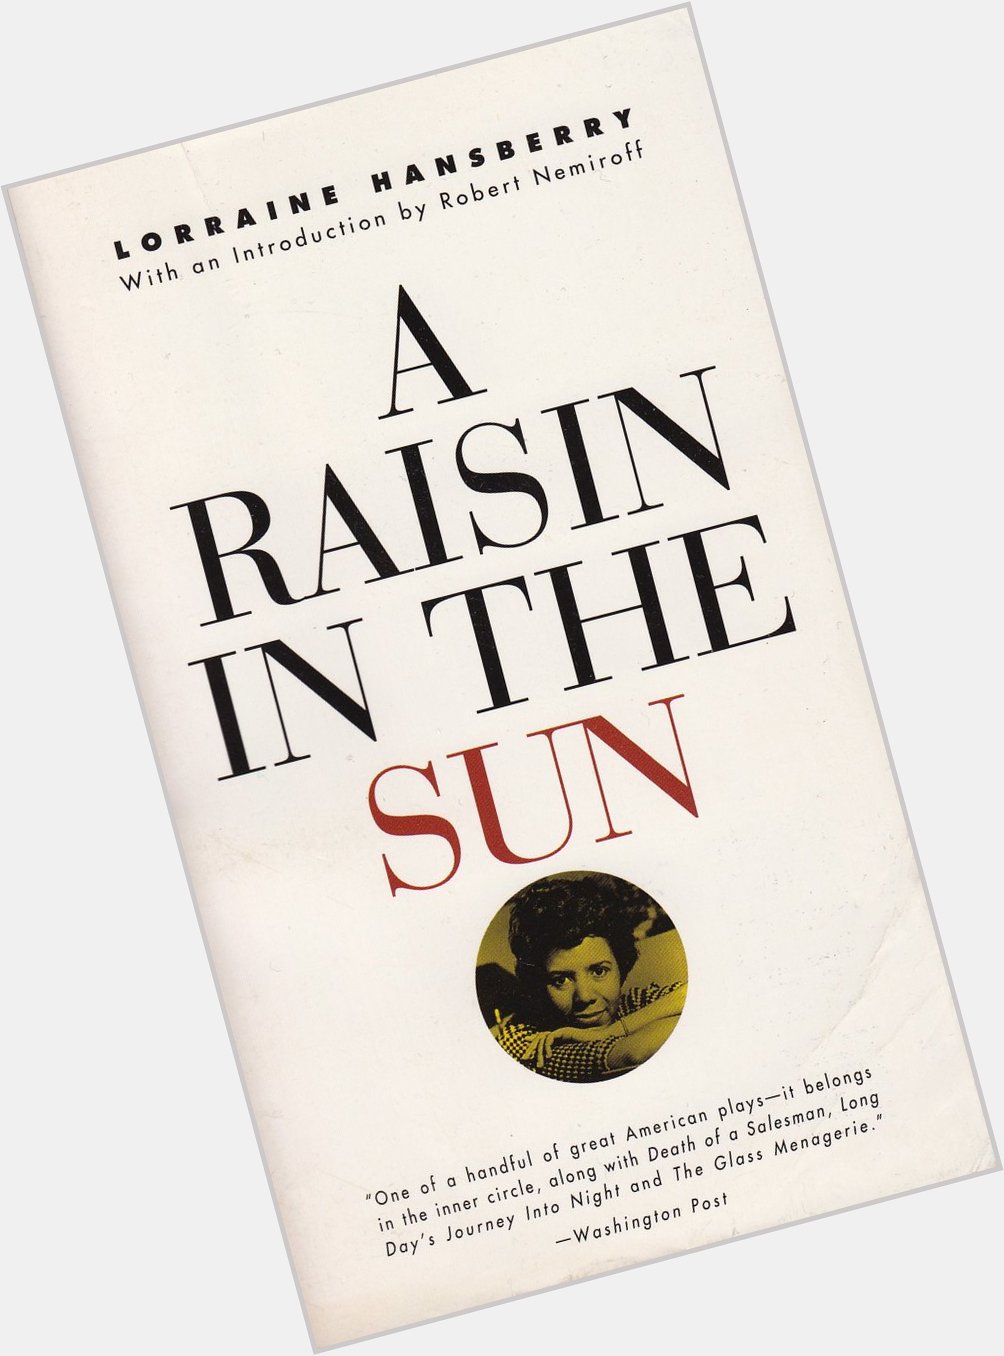 Happy birthday to the late great banned book author Lorraine Hansberry!  